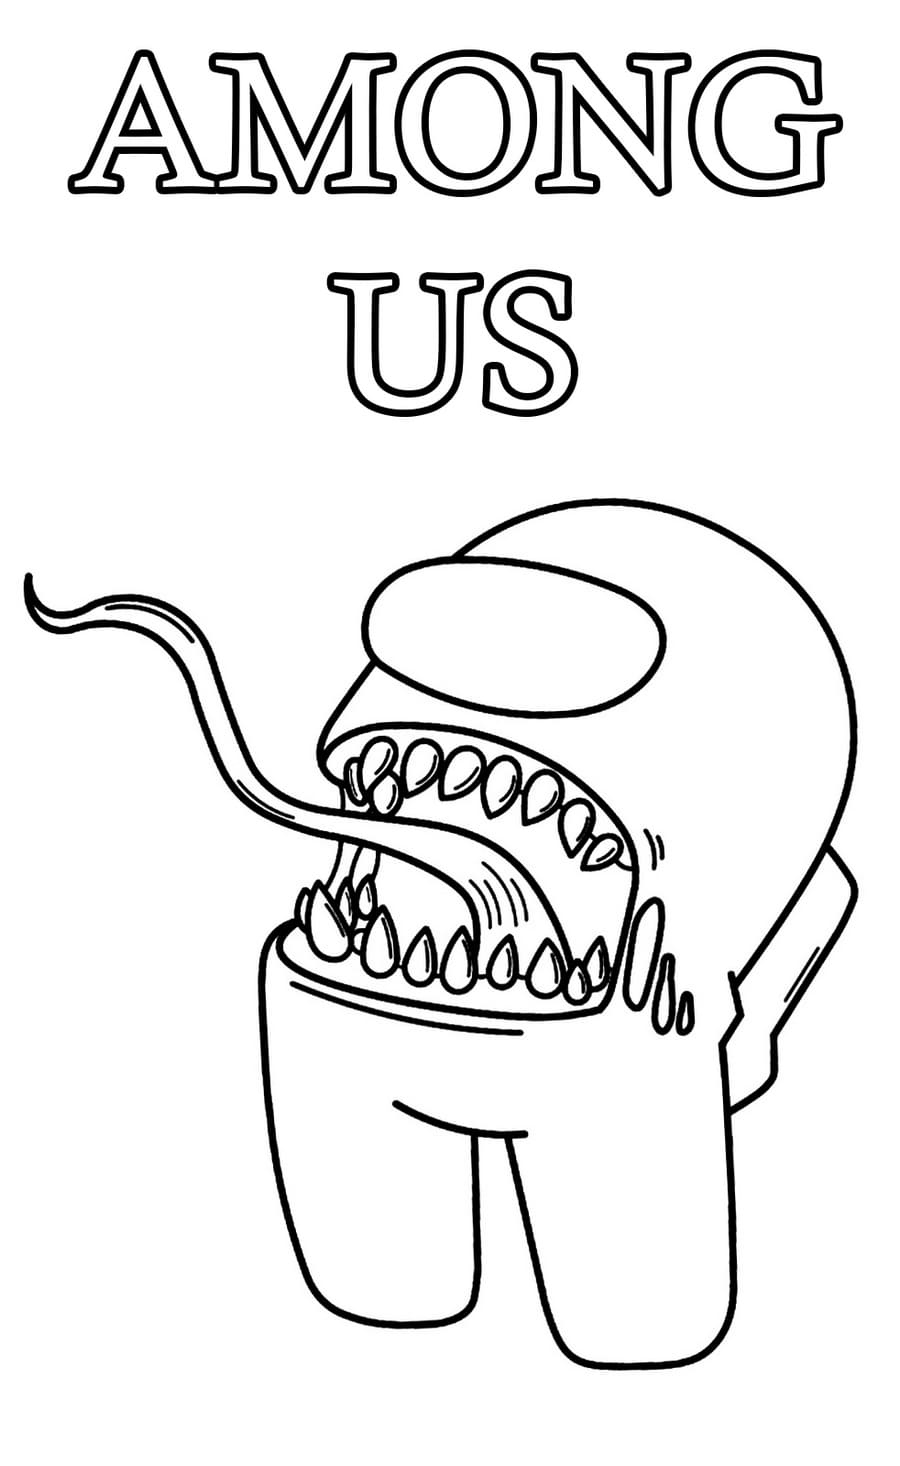 Coloring page Among Us The killer with the long tongue